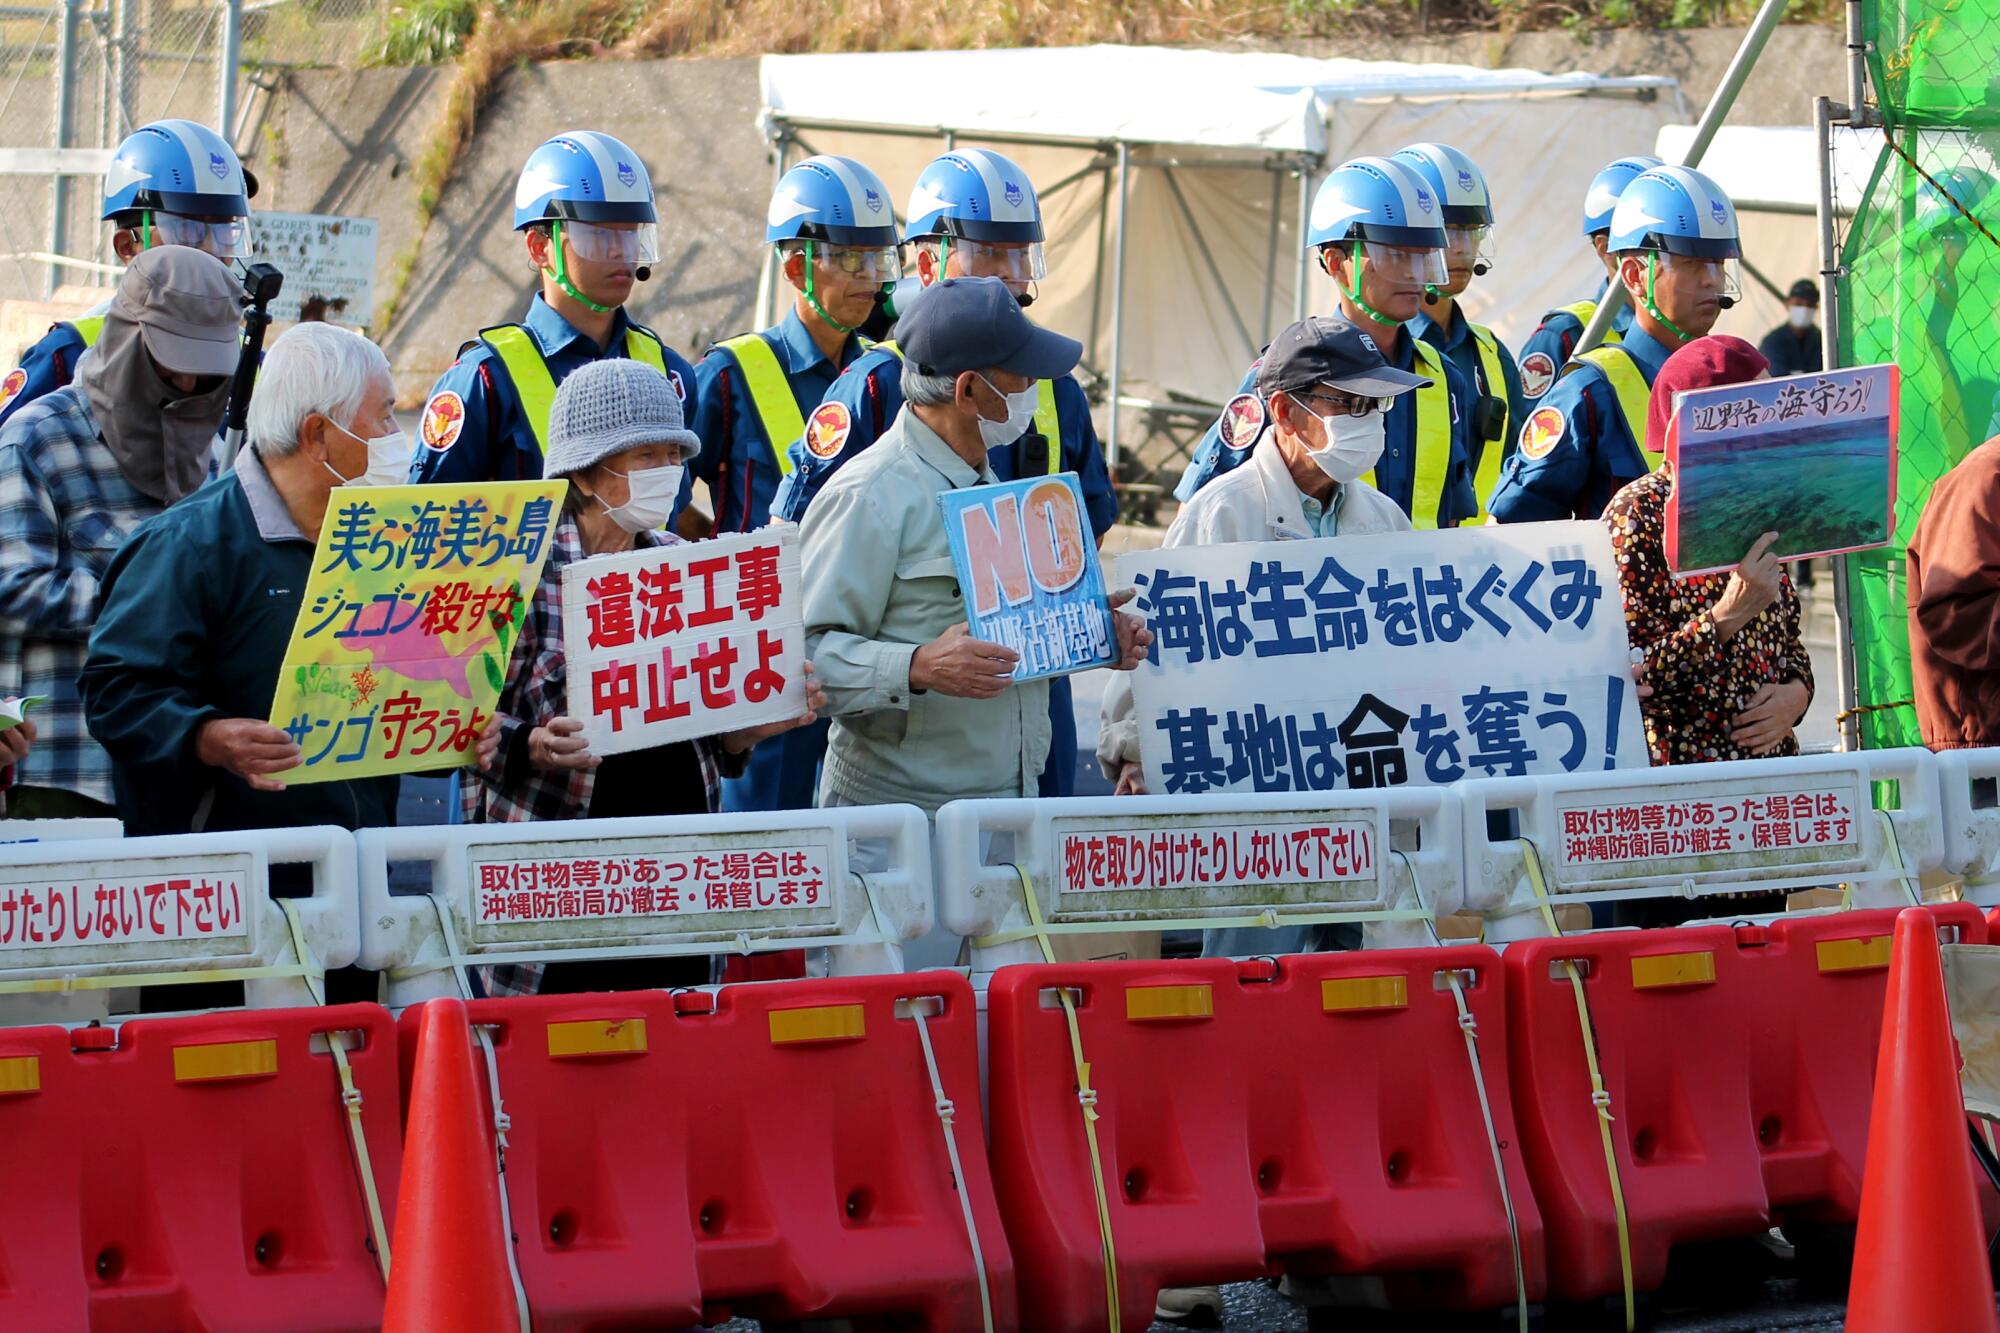 Protesters gather in front of a U.S. Marine Corps camp in Okinawa, holding signs in protest of construction and expansion.